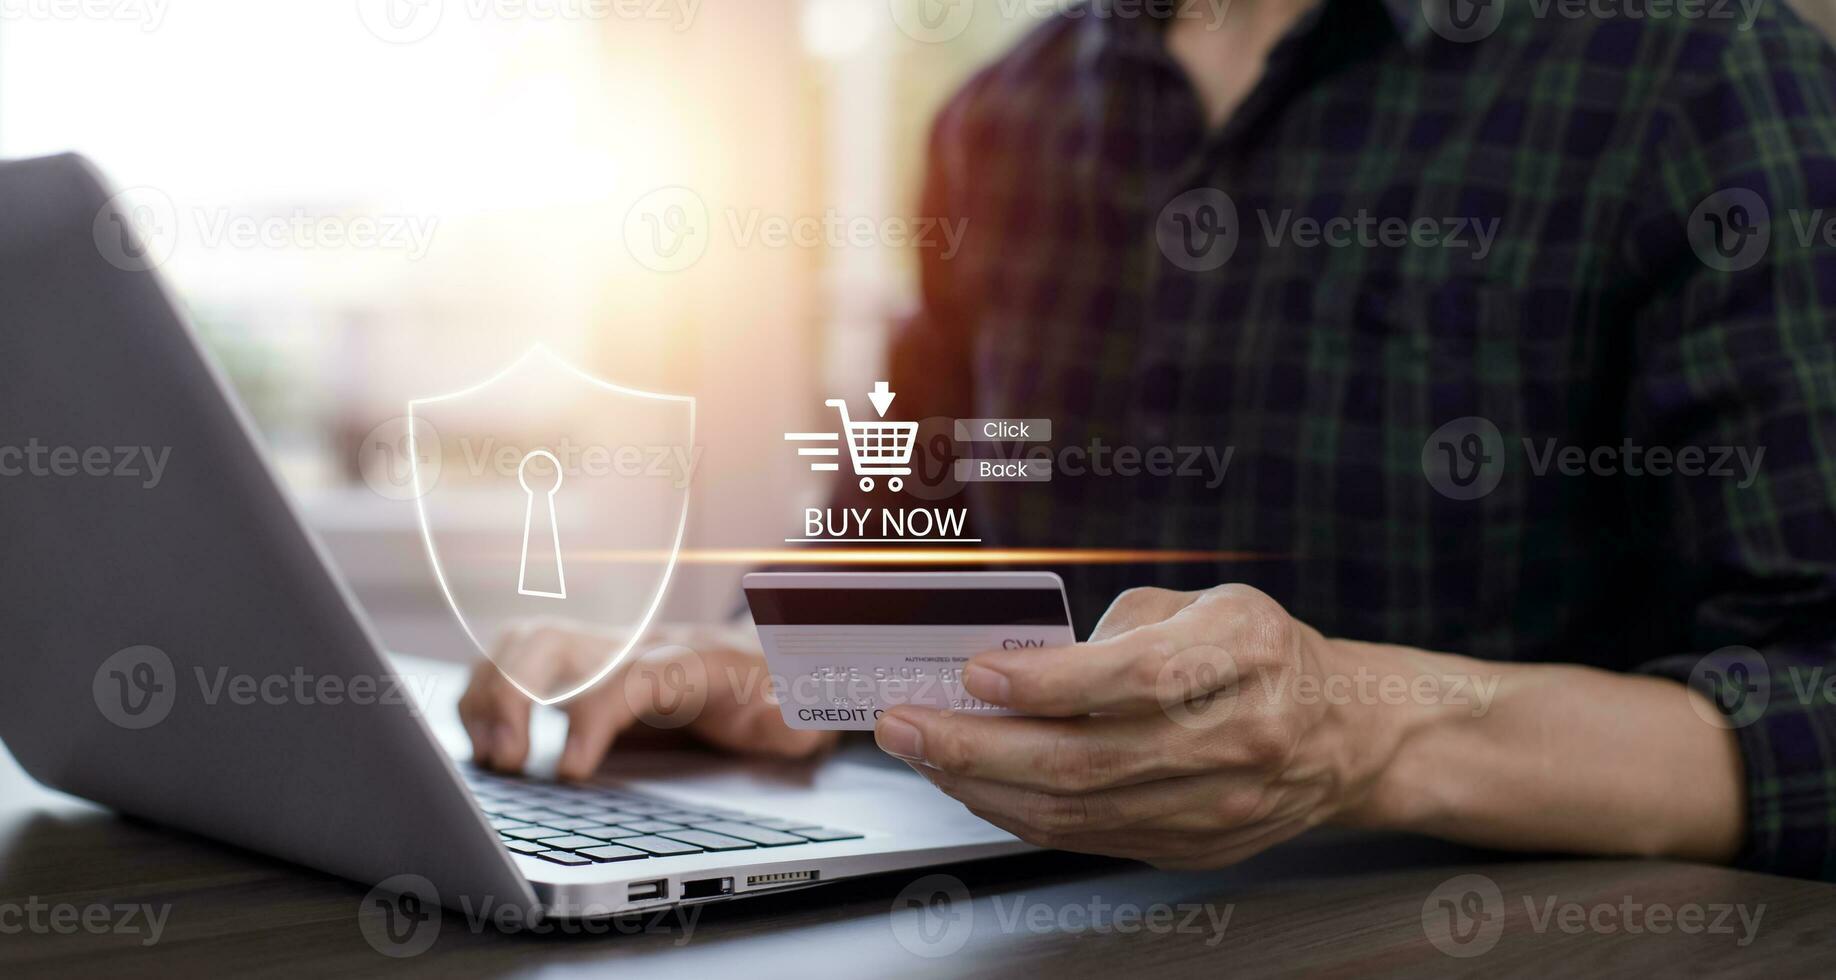 Cybersecurity and Security password login online concept, credit card on the Internet on the laptop computer, online payment, shopping online, e-commerce, internet banking, spending money concept. photo